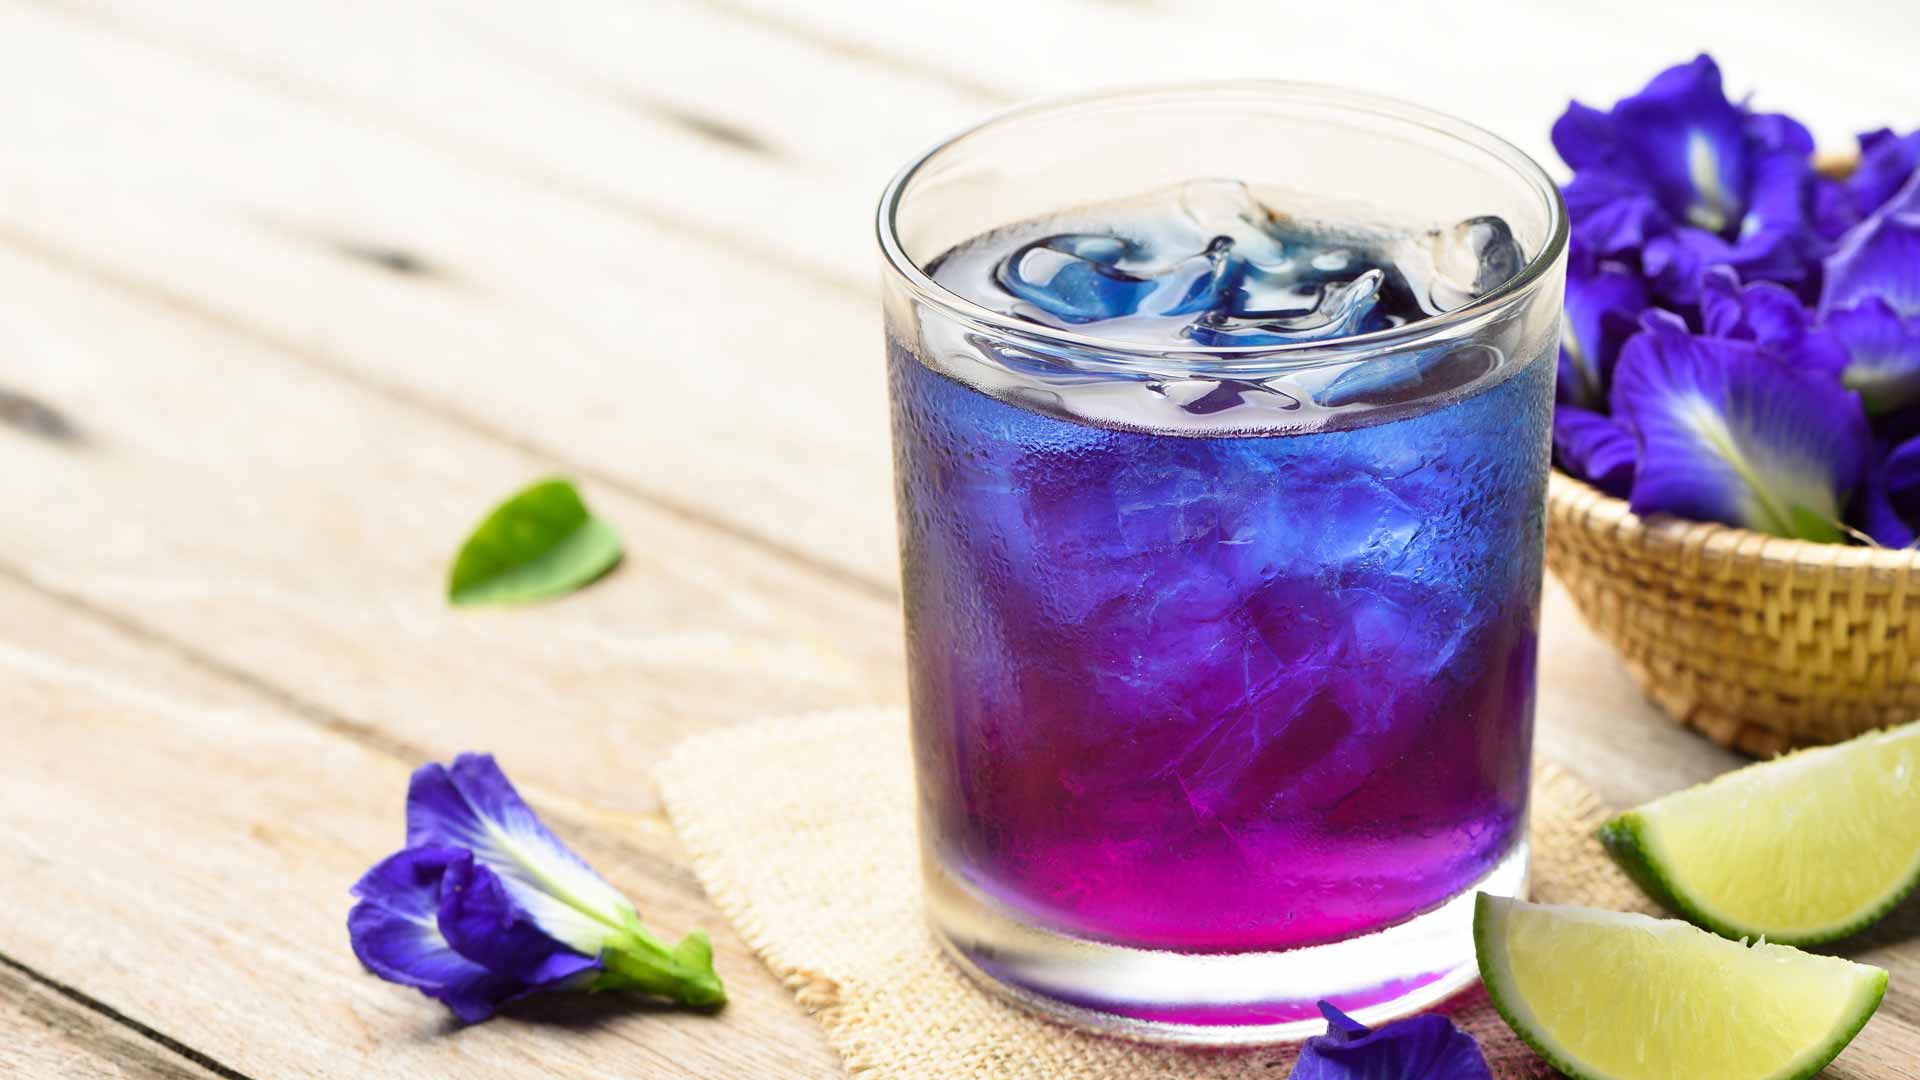 butterfly-pea-tea-ingrediente-cocktail-coqtail-milano